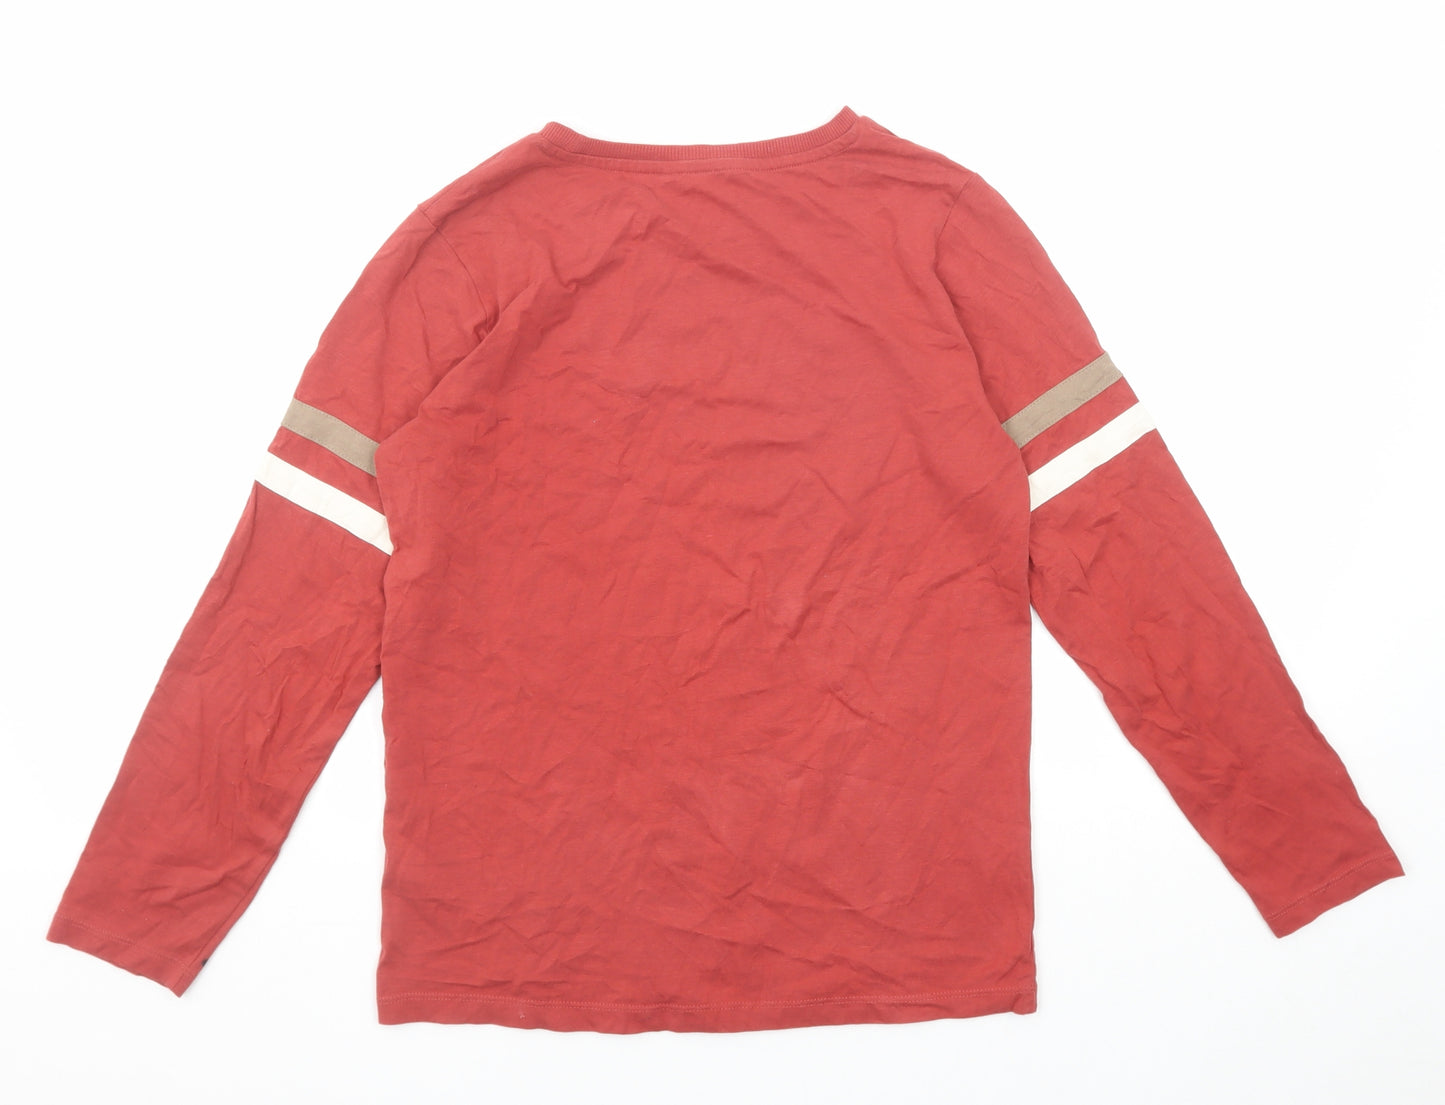 Marks and Spencer Boys Red Cotton Pullover T-Shirt Size 11-12 Years Round Neck Pullover - Stripe Detail